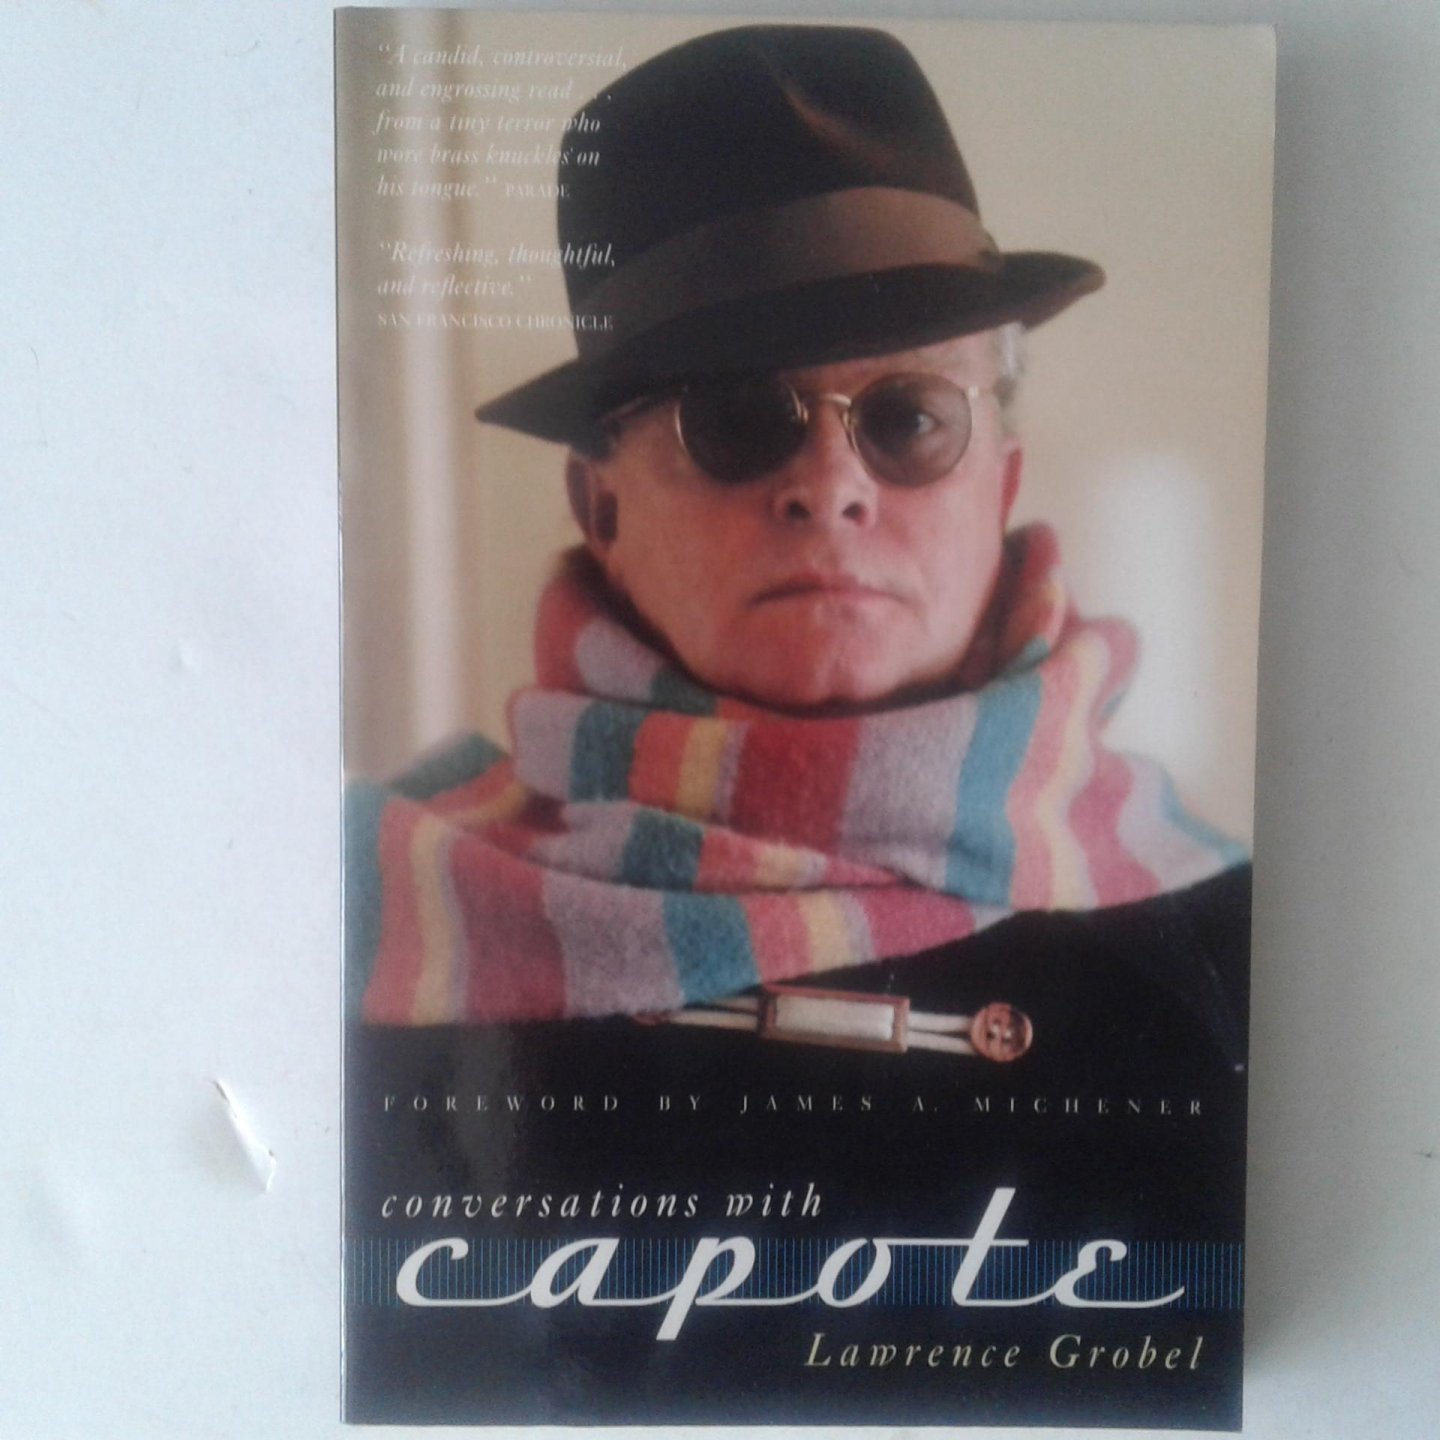 Grobel, Lawrence - Conservations with Capote